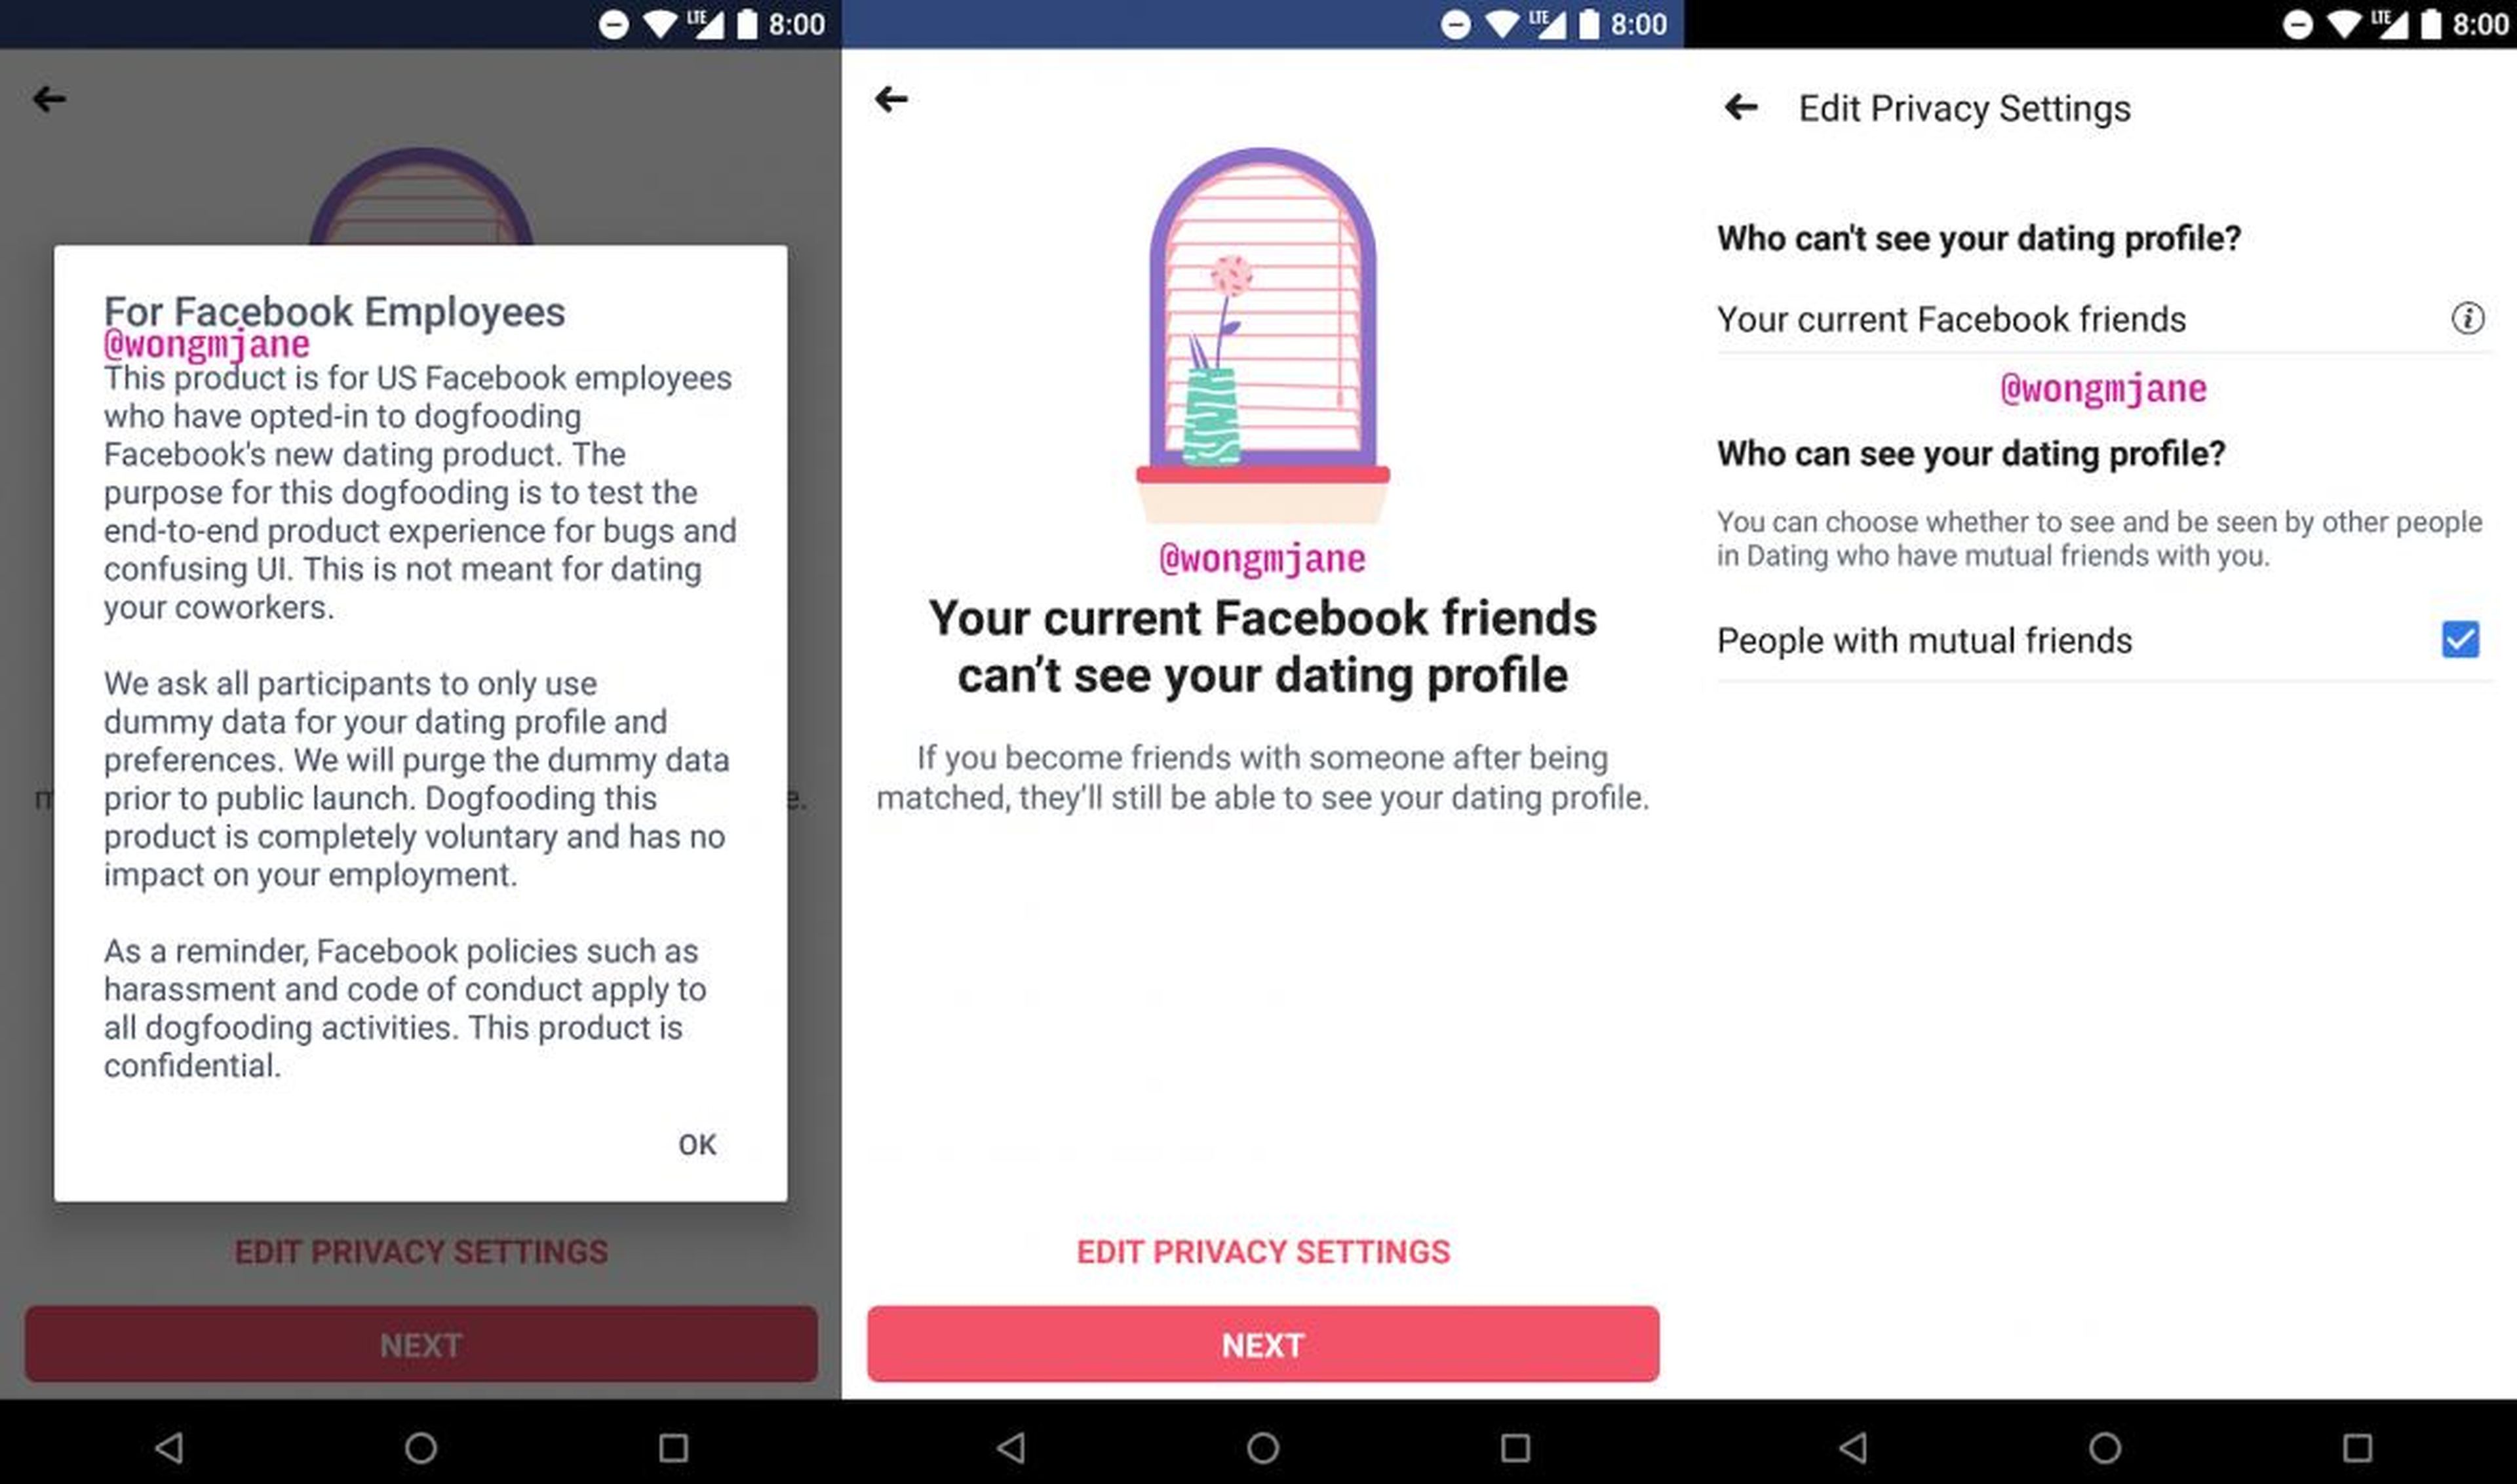 Here's our first look at Facebook's dating feature, now being tested by its employees